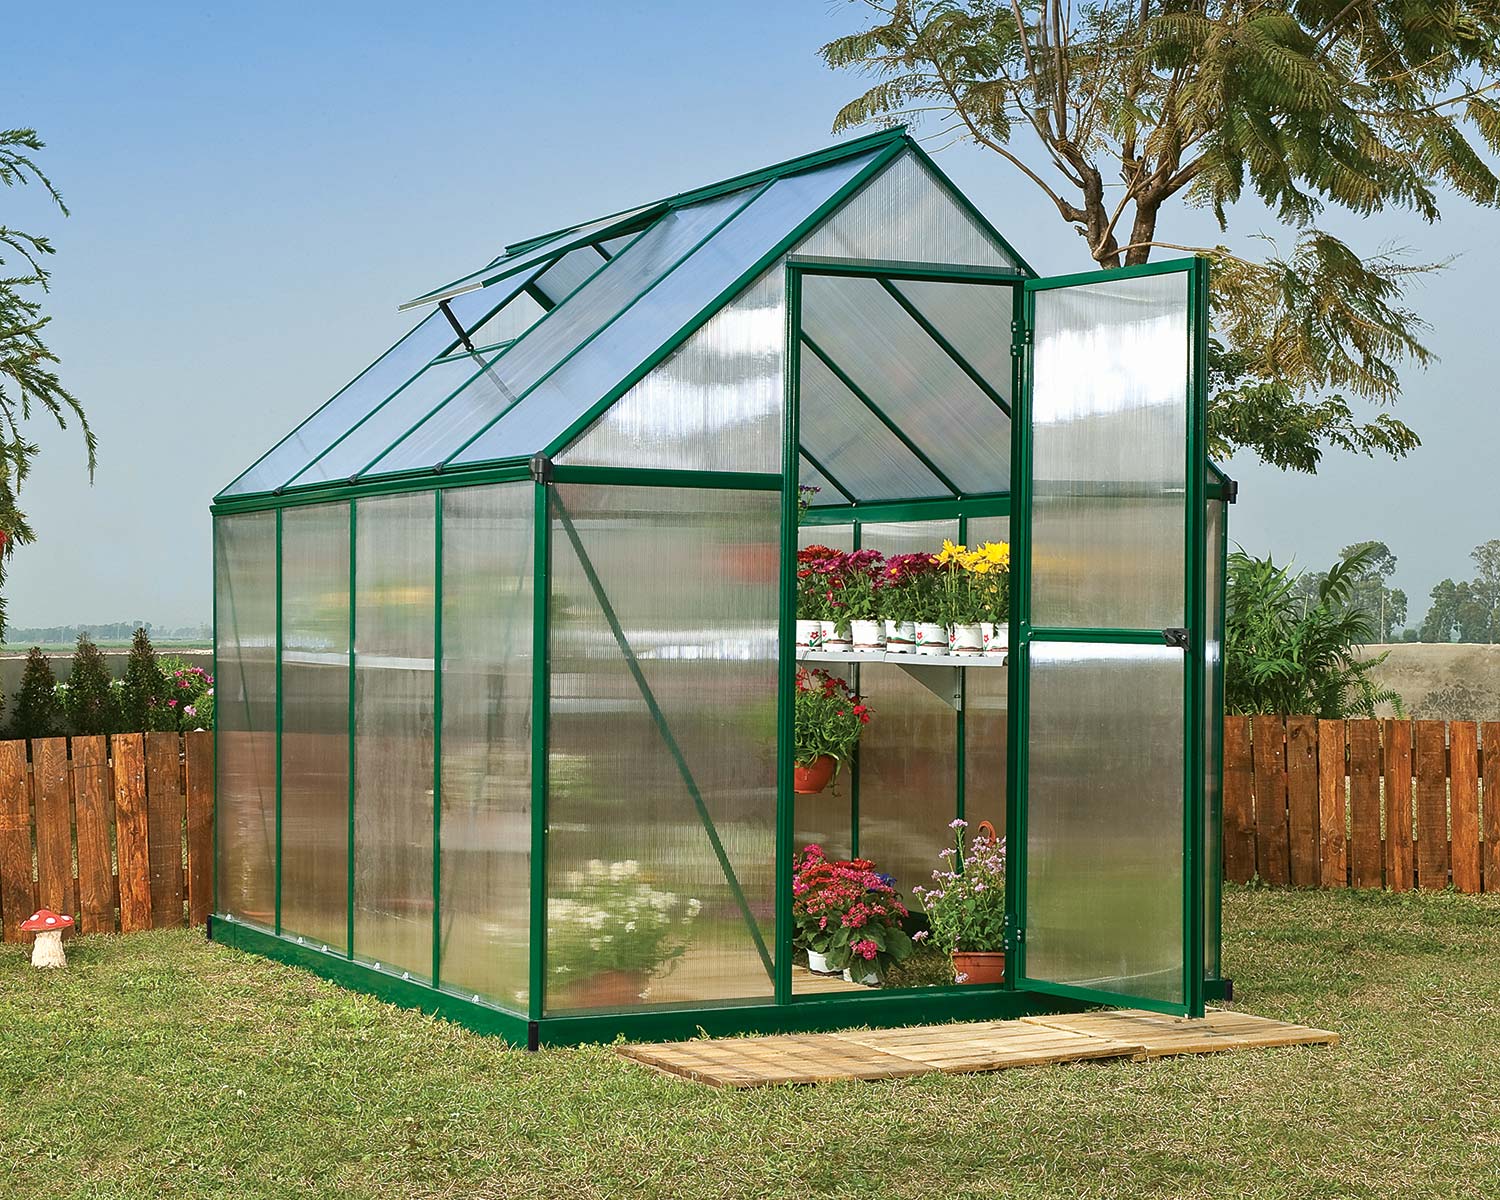 Mythos 6' x 8' Greenhouse Green Structure & Twinwall Panels outside on a lawn